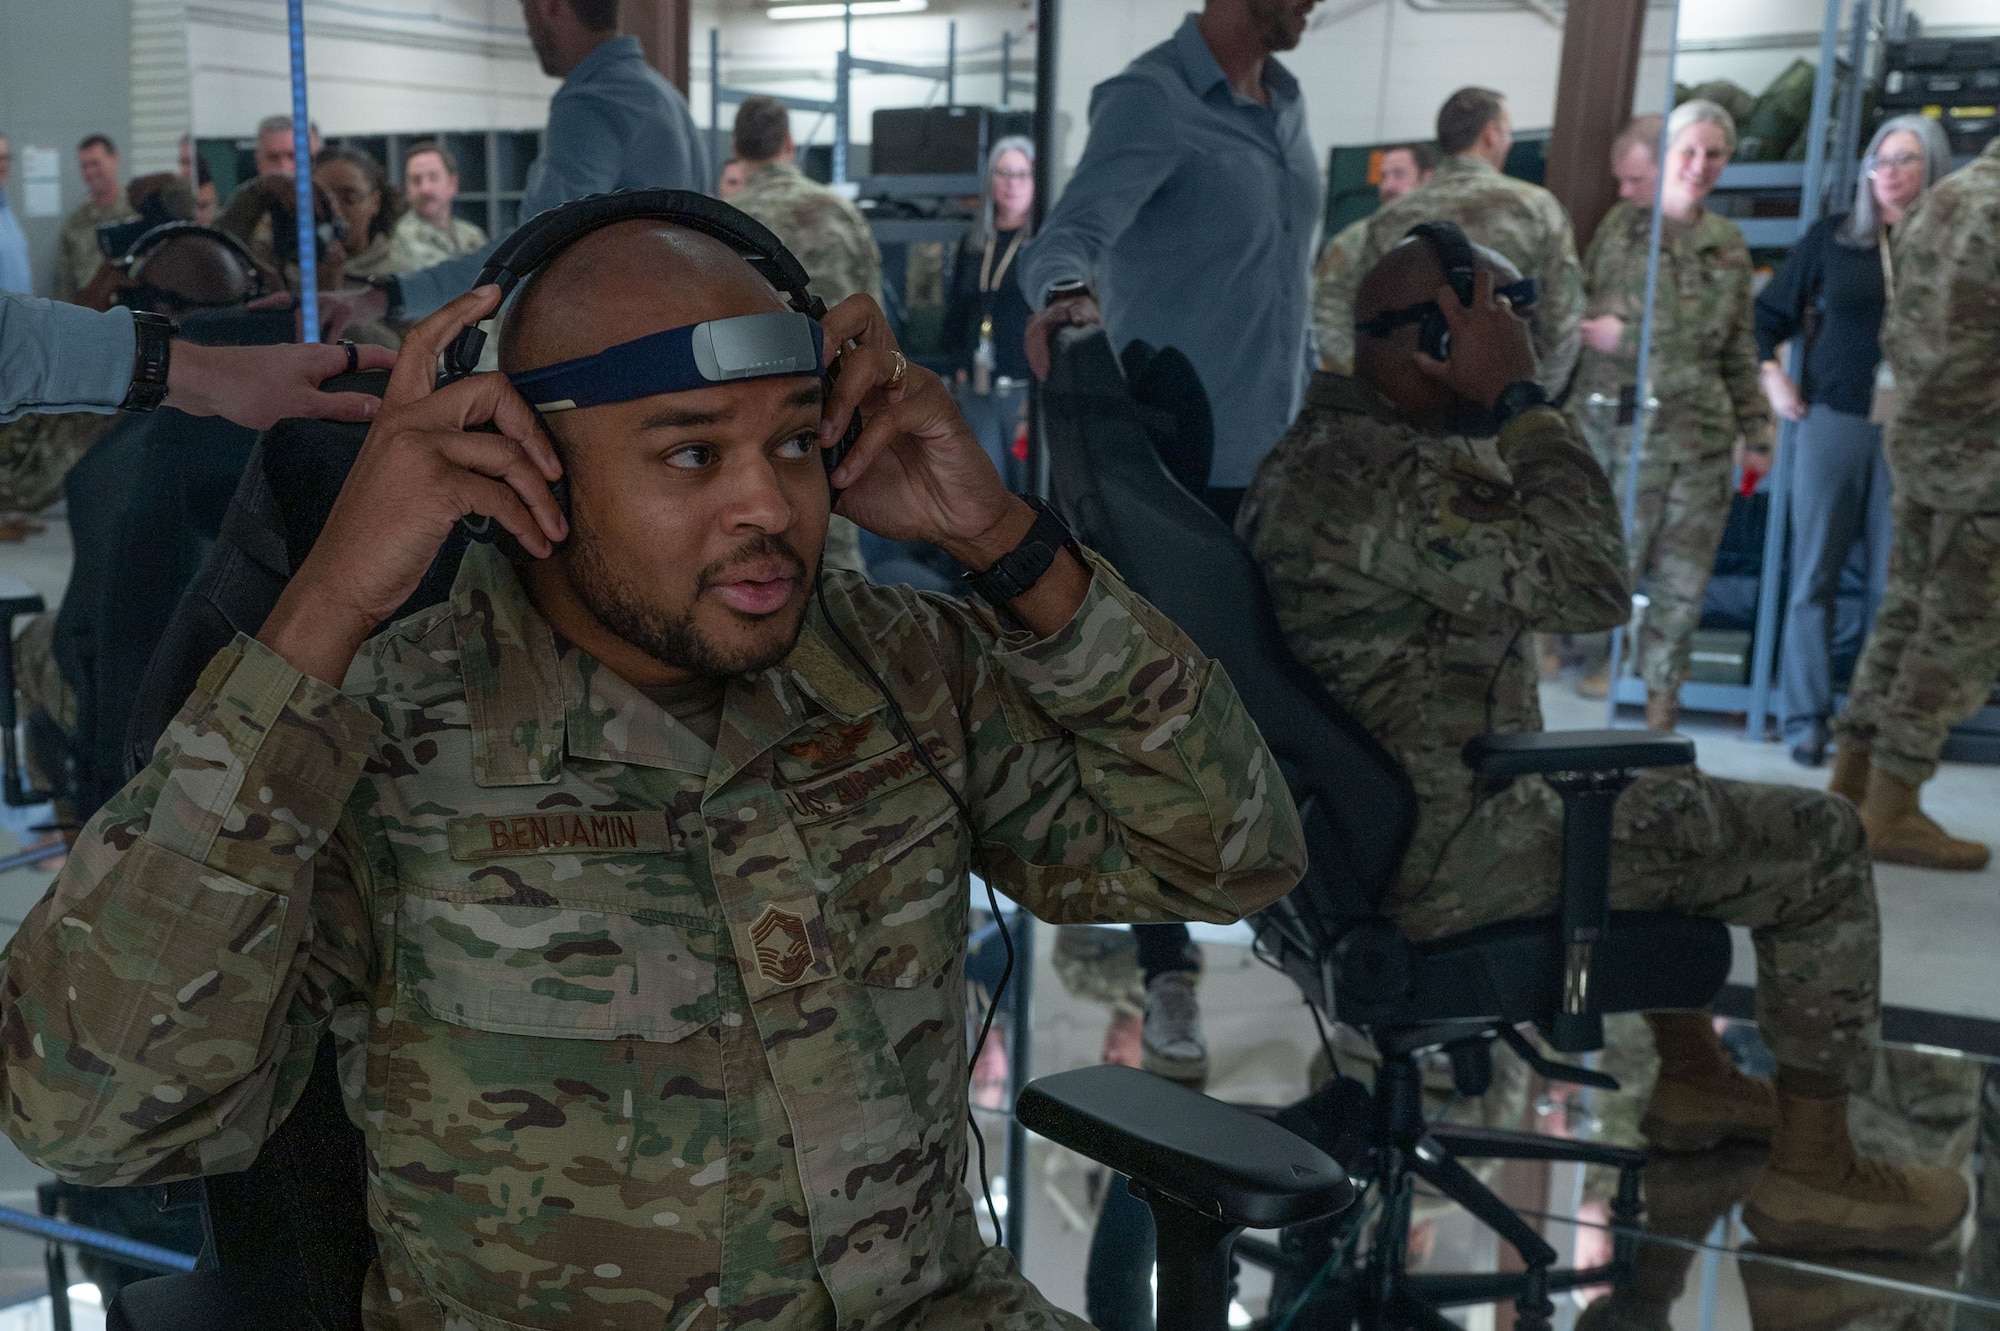 A man in military uniform sits on a chair inside a mirrored room, putting on a headset.